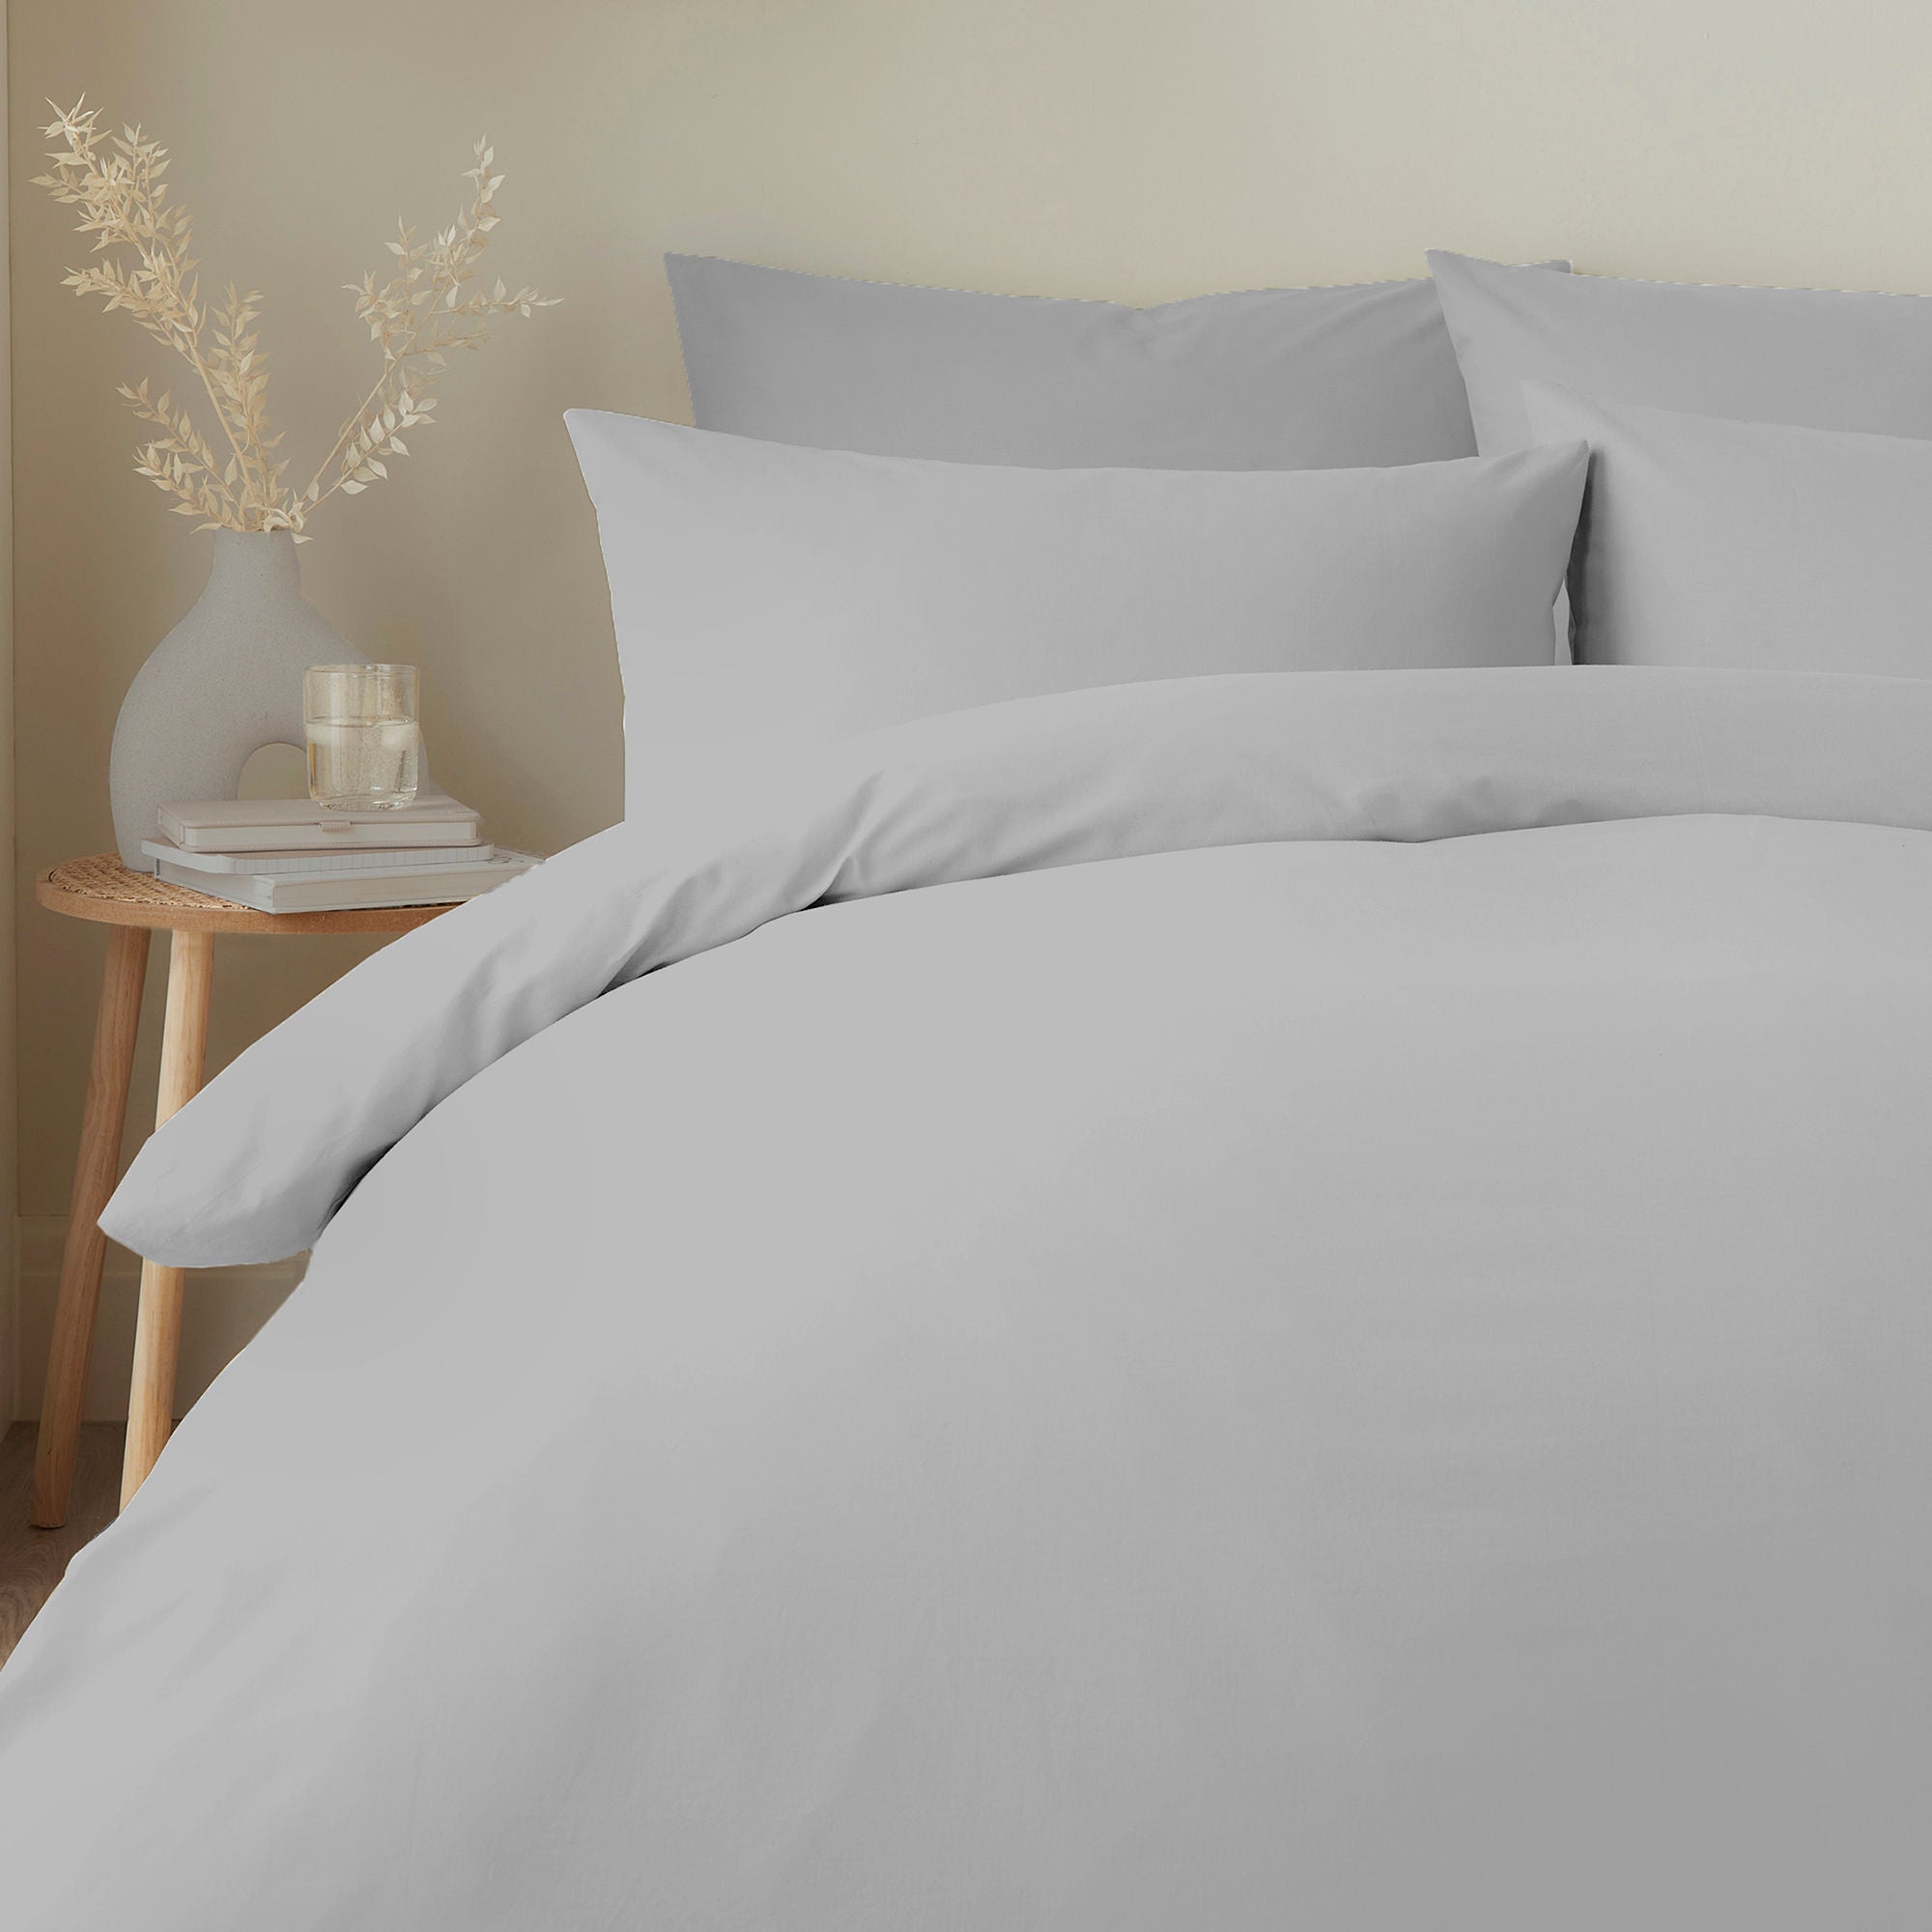 Appletree Pure Cotton Duvet Cover Set by Appletree Style in Silver - Duvet Cover Set - Appletree Style